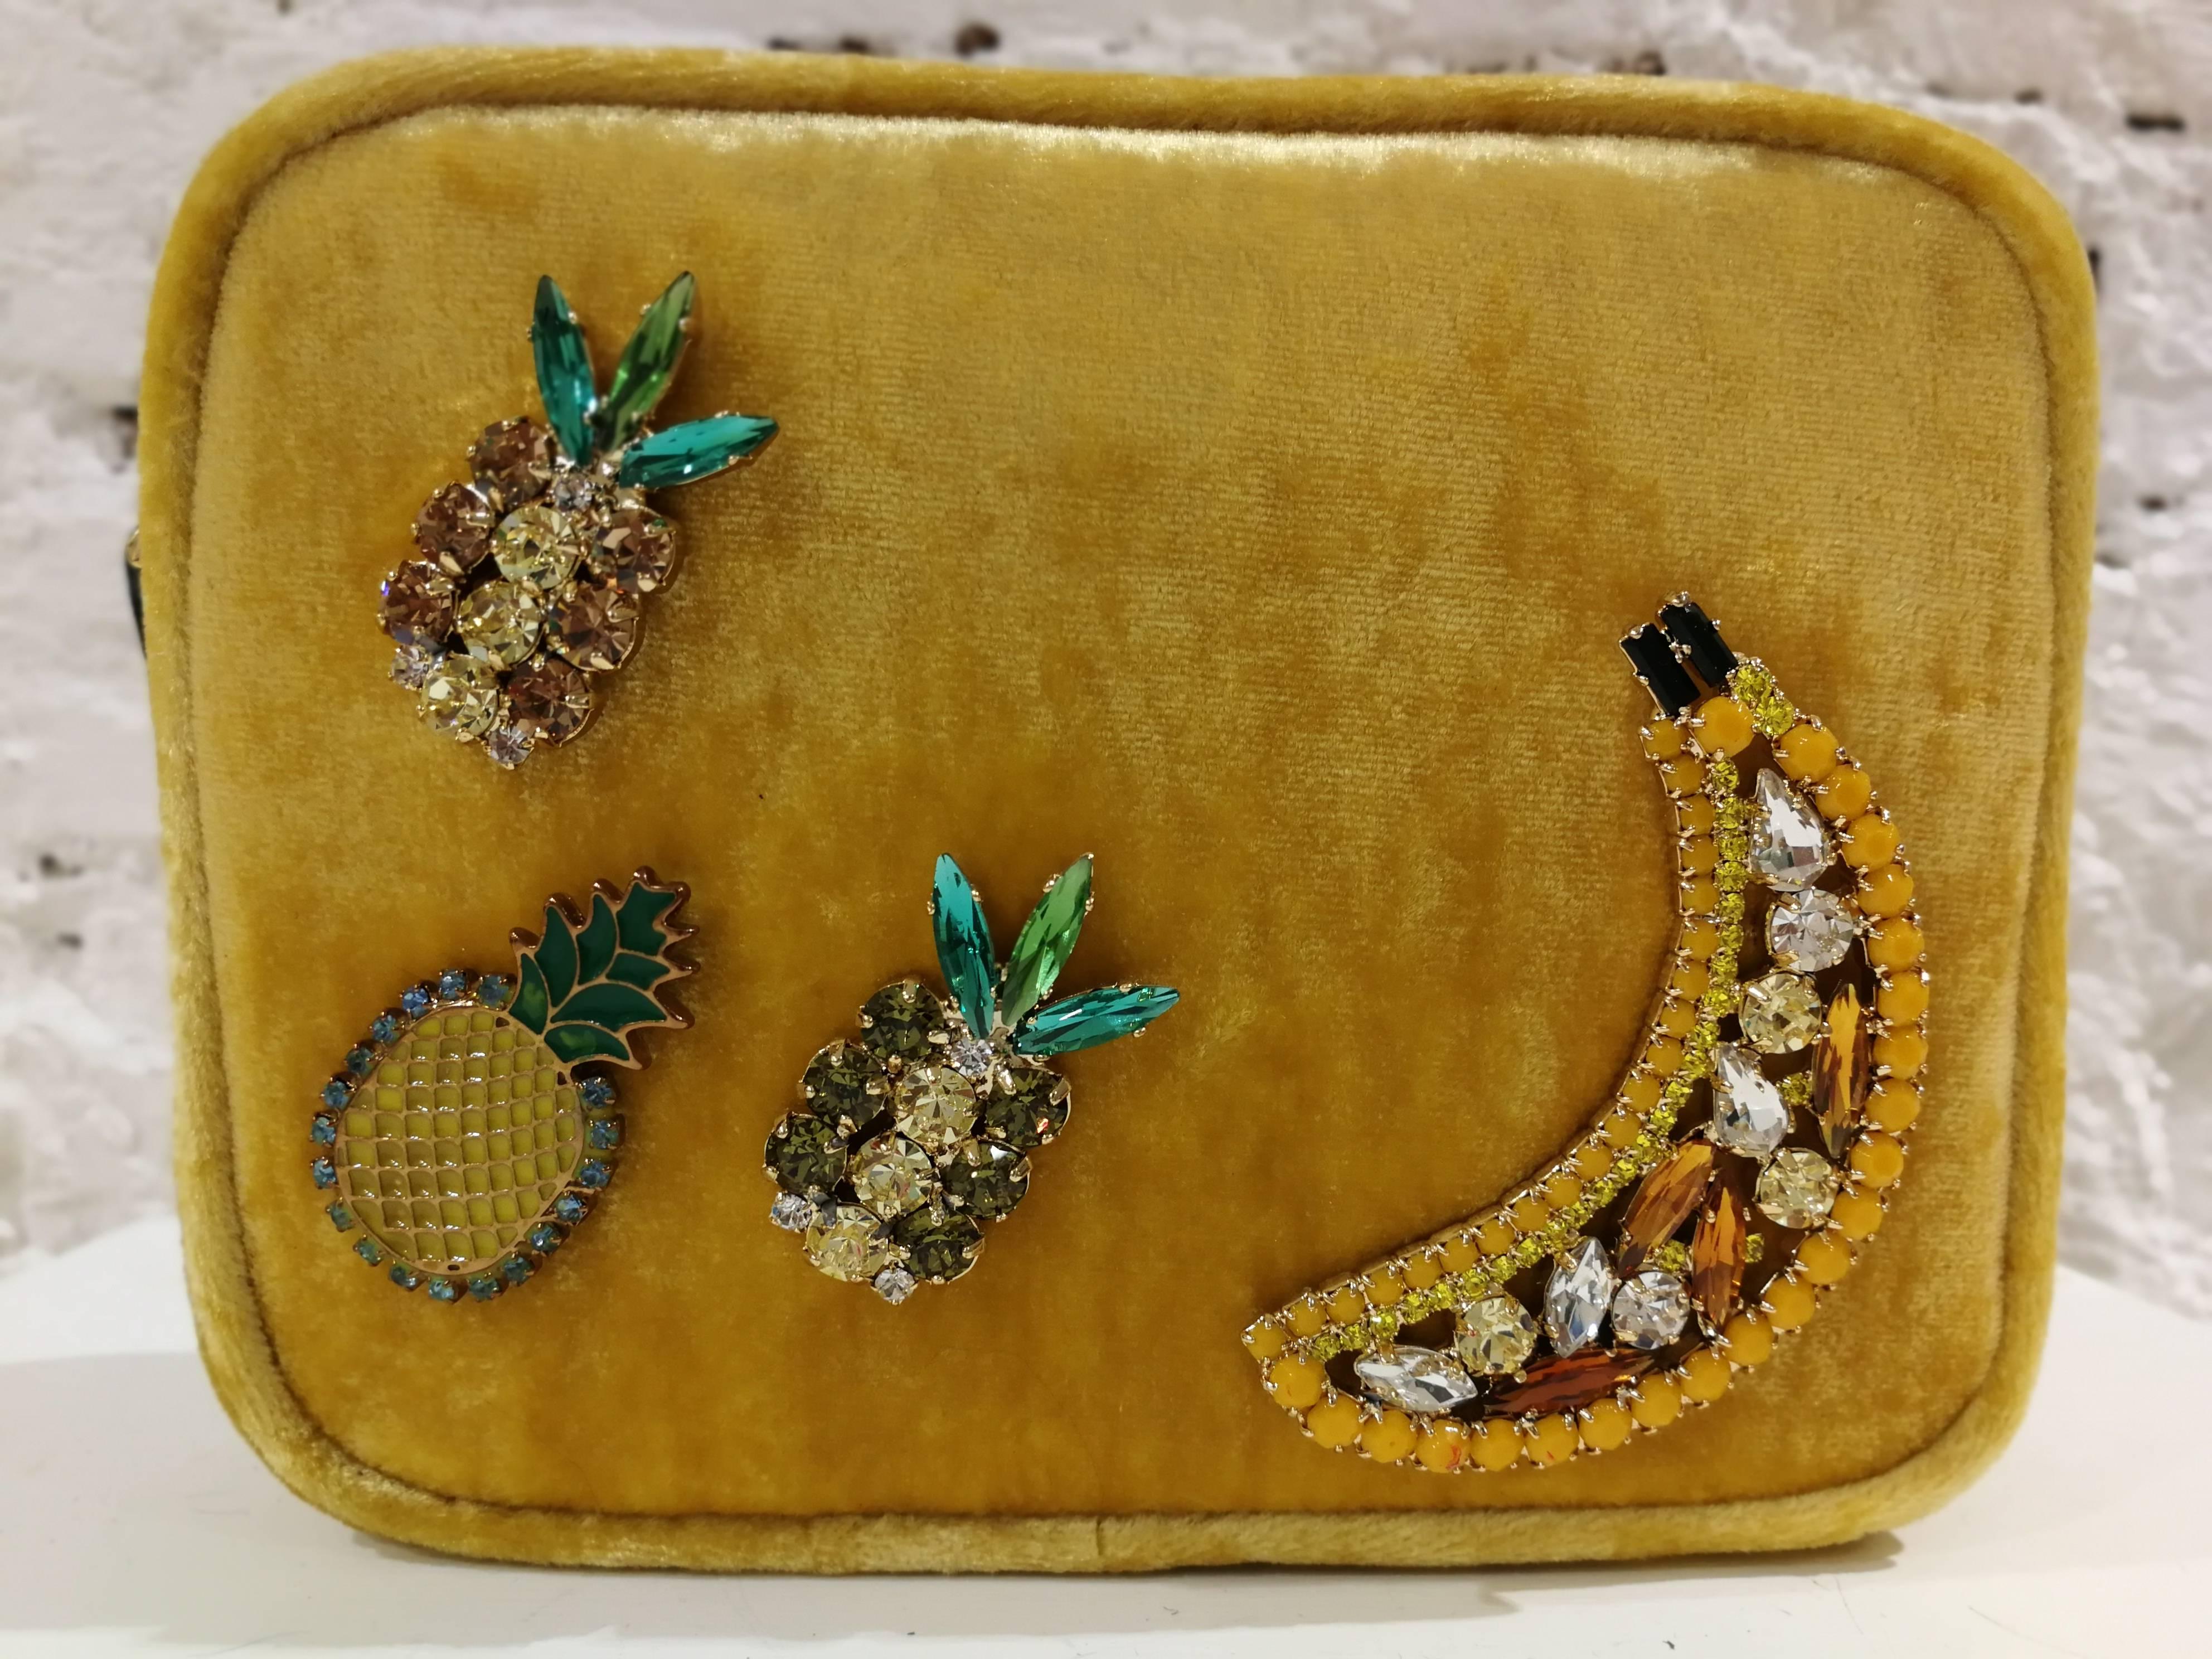 Lisa C. bijoux Fanny Pack Shoulder Yellow Velvet Bag

Yellow velvet bag embellished with ananas and banana swarovski 

Totally handmade in italy 

Can be easily used ad a fanny pack or as a shoulder bag

It comes with a black leather belt size 95 cm